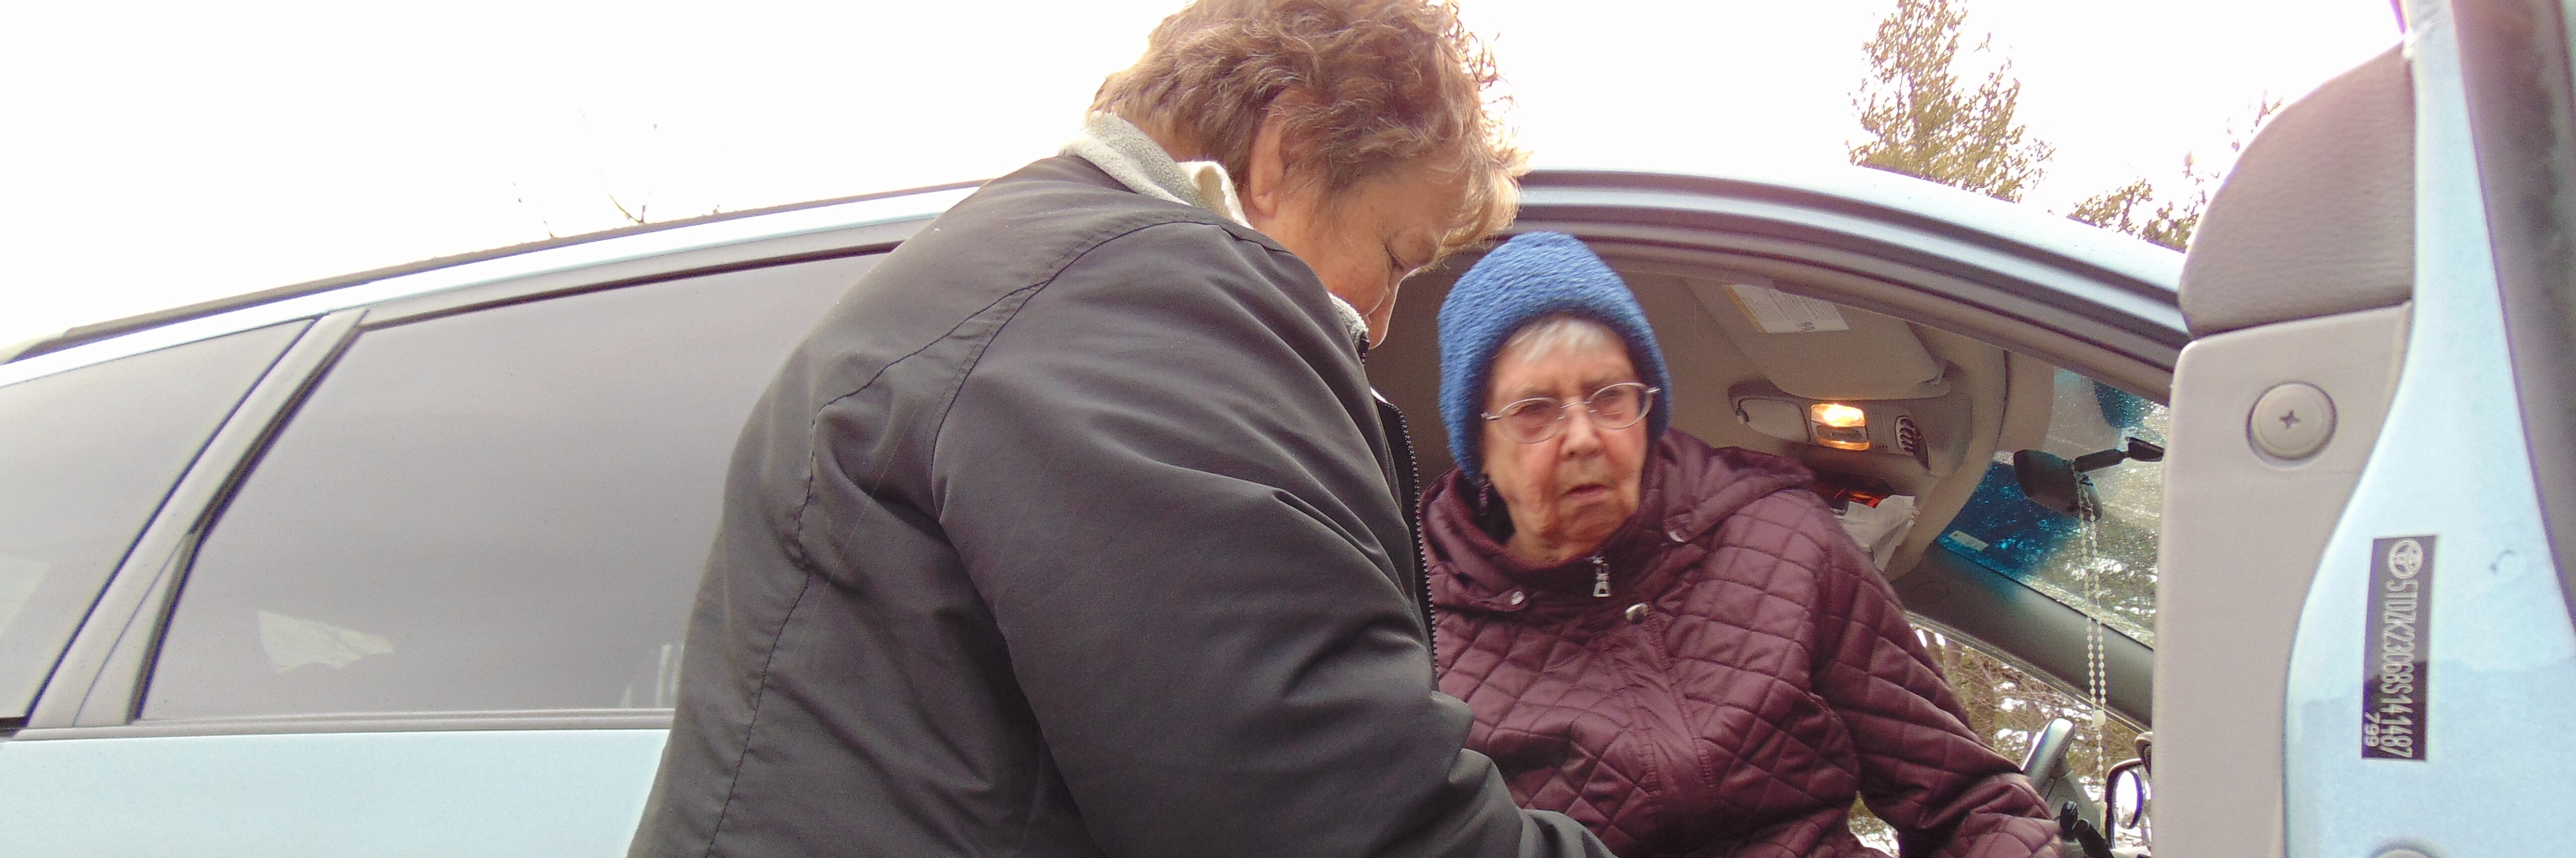 A woman helping an Older Vermonter out of a vehicle